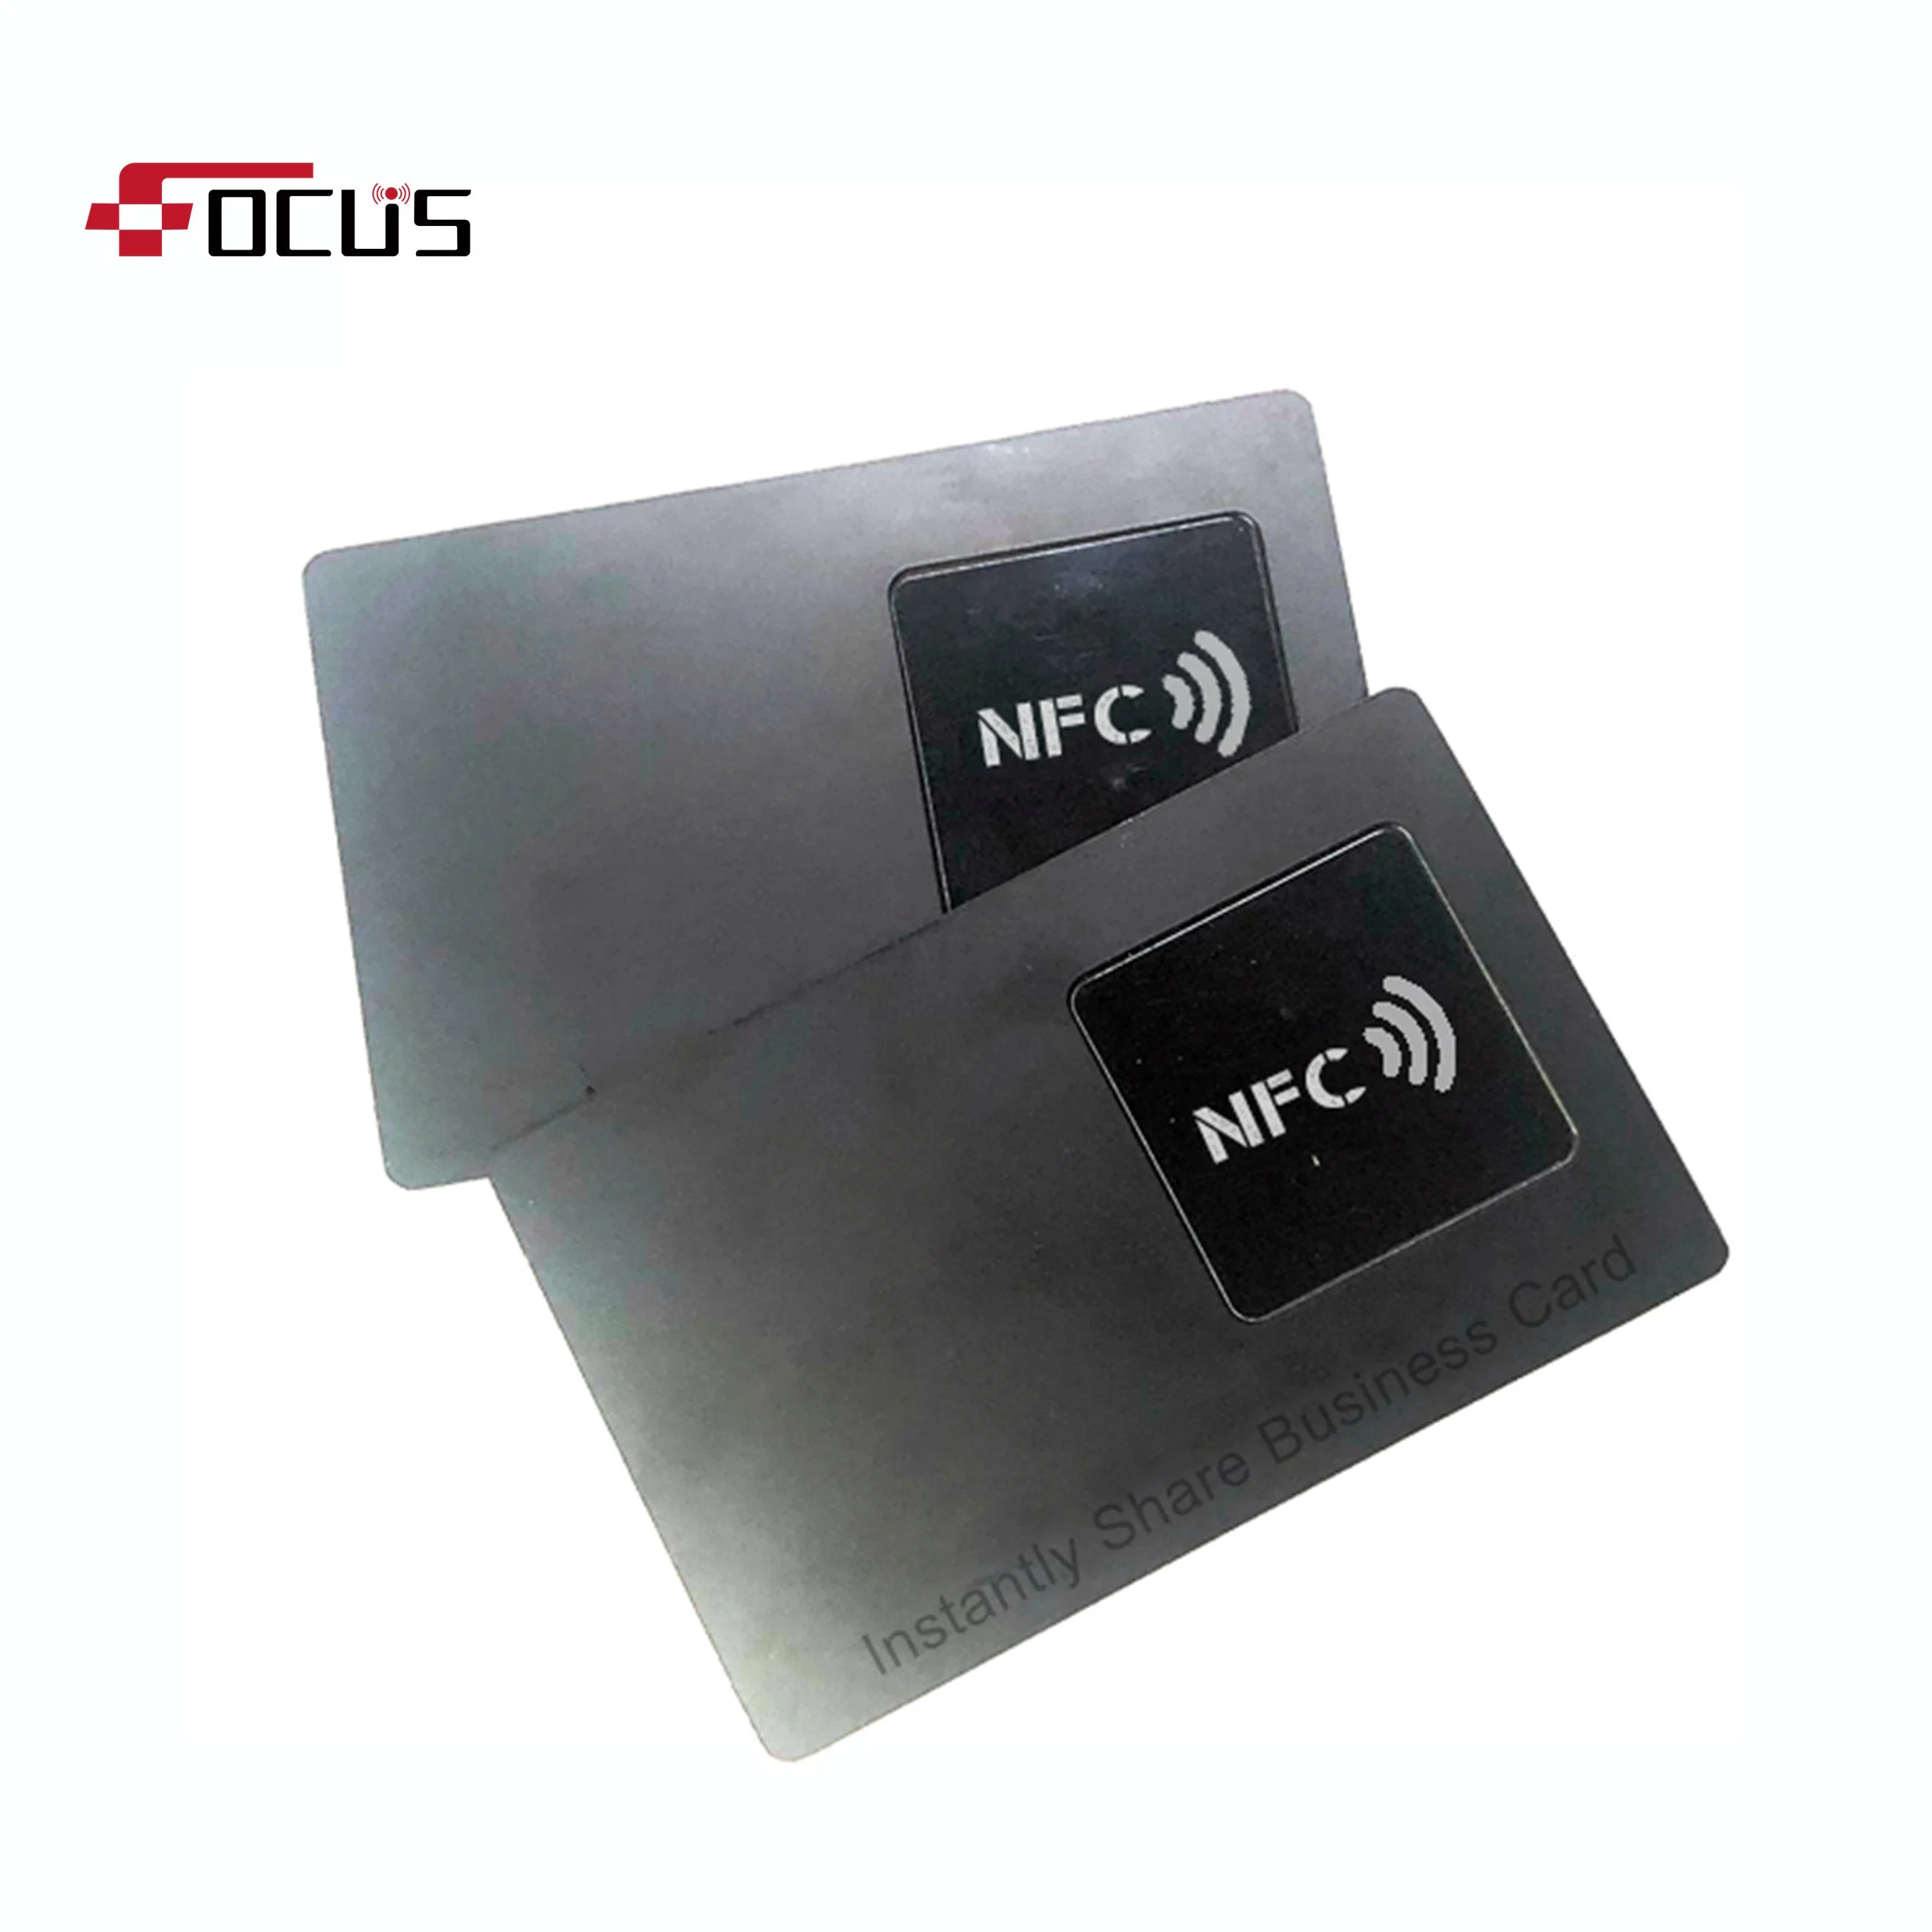 Hollow Craft Metal Material RFID Gift Card Plastic Smart ID IC Cards